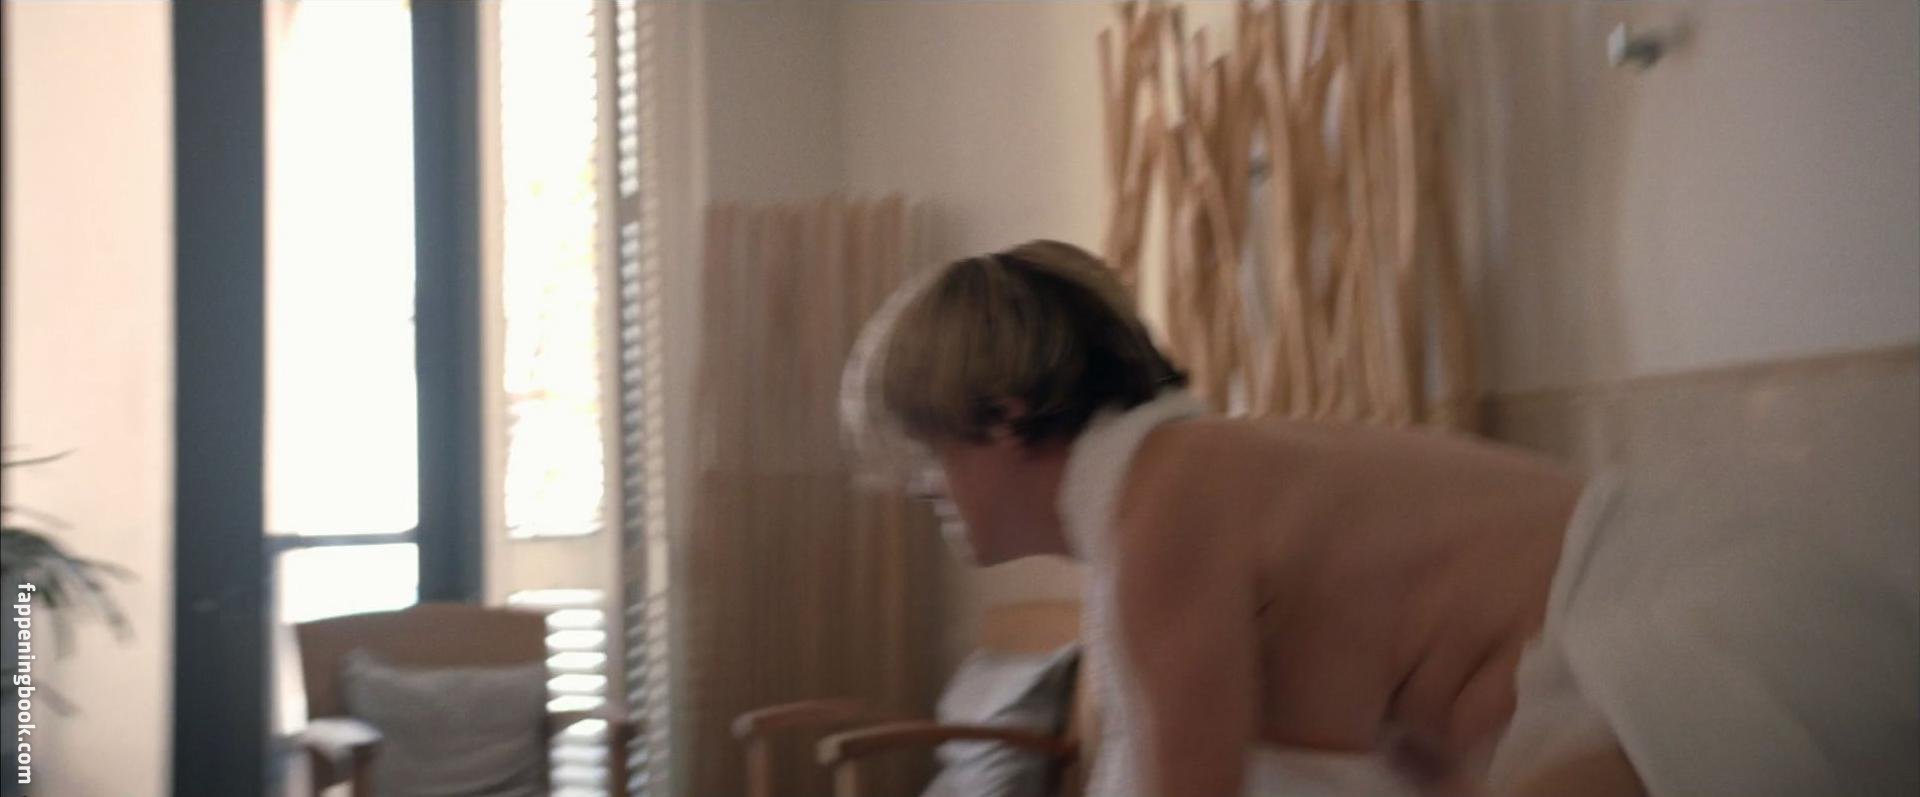 Alice Wetterlund Nude, The Fappening - Photo #18072 - FappeningBook.